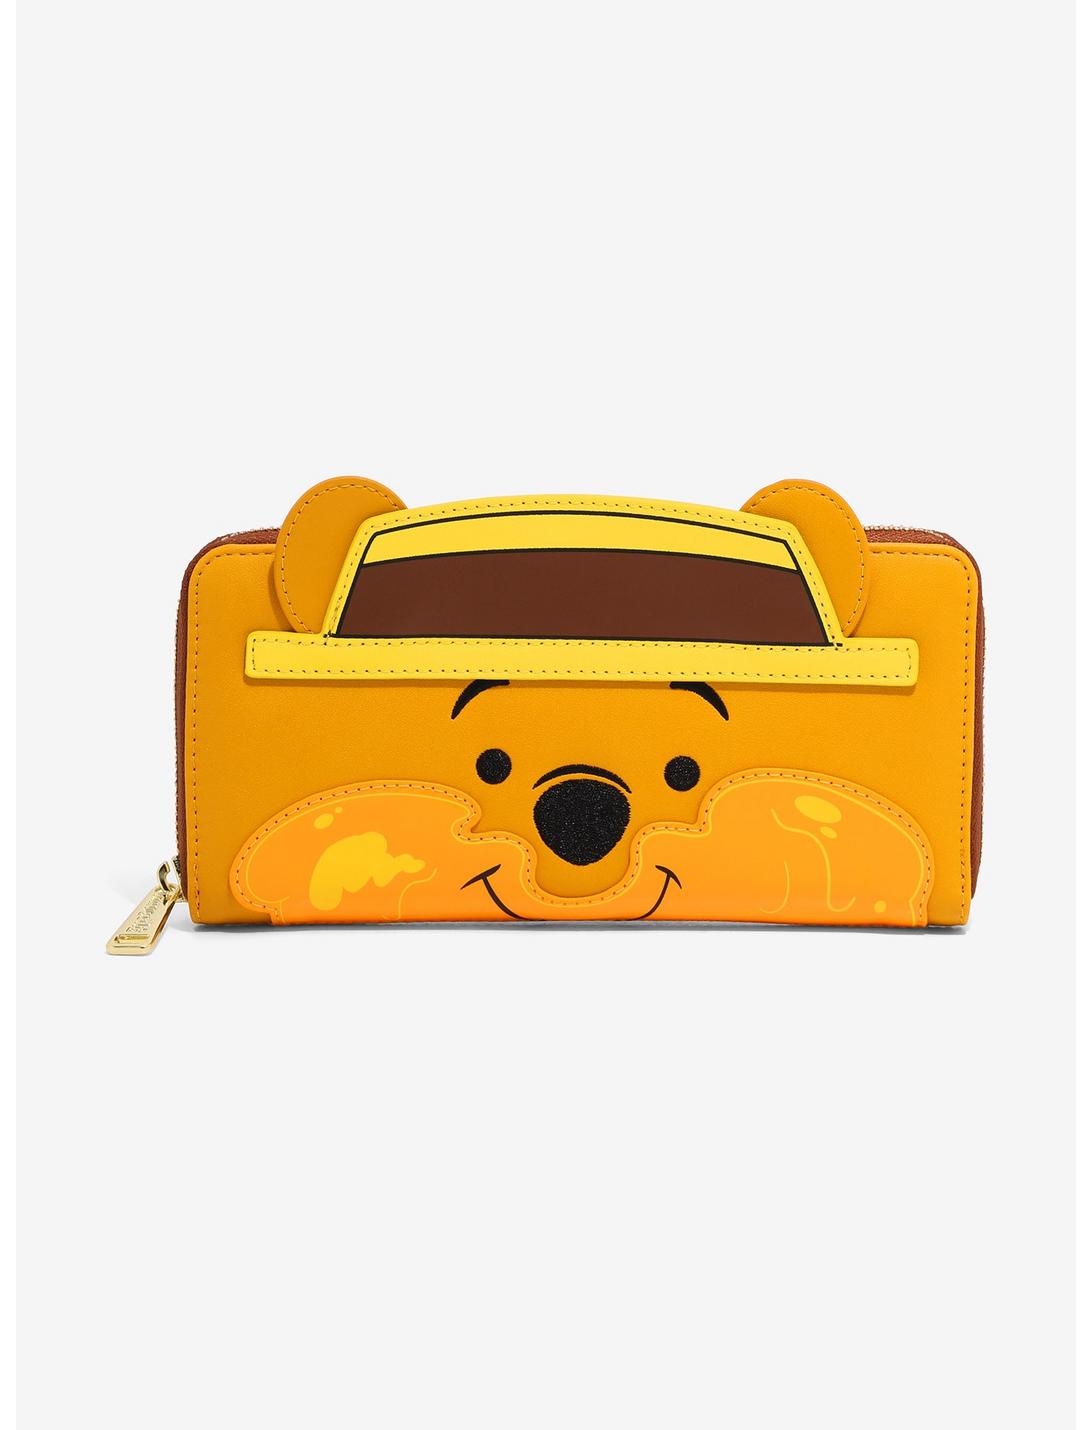 Loungefly Disney Winnie the Pooh Dripping Hunny Wallet - BoxLunch Exclusive , , hi-res